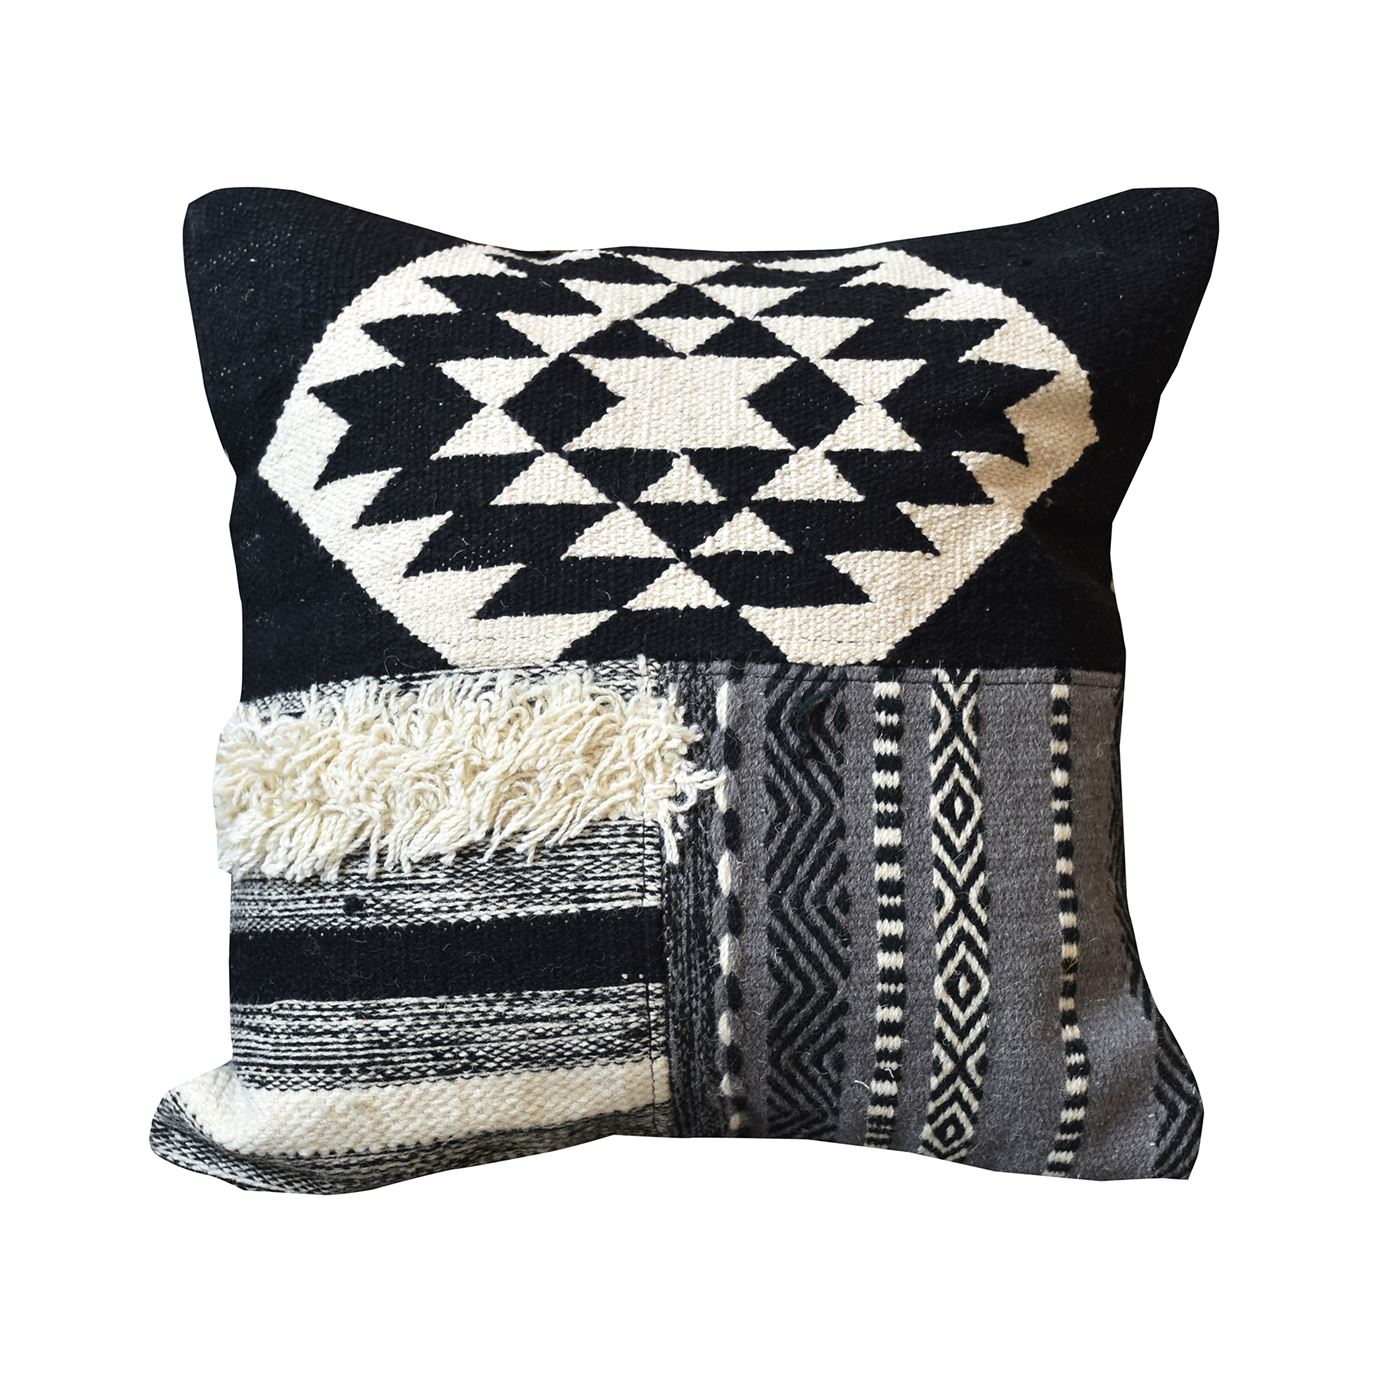 Carmor Pillow, Wool, Cotton, Natural White, Charcoal, Pitloom, Flat Weave